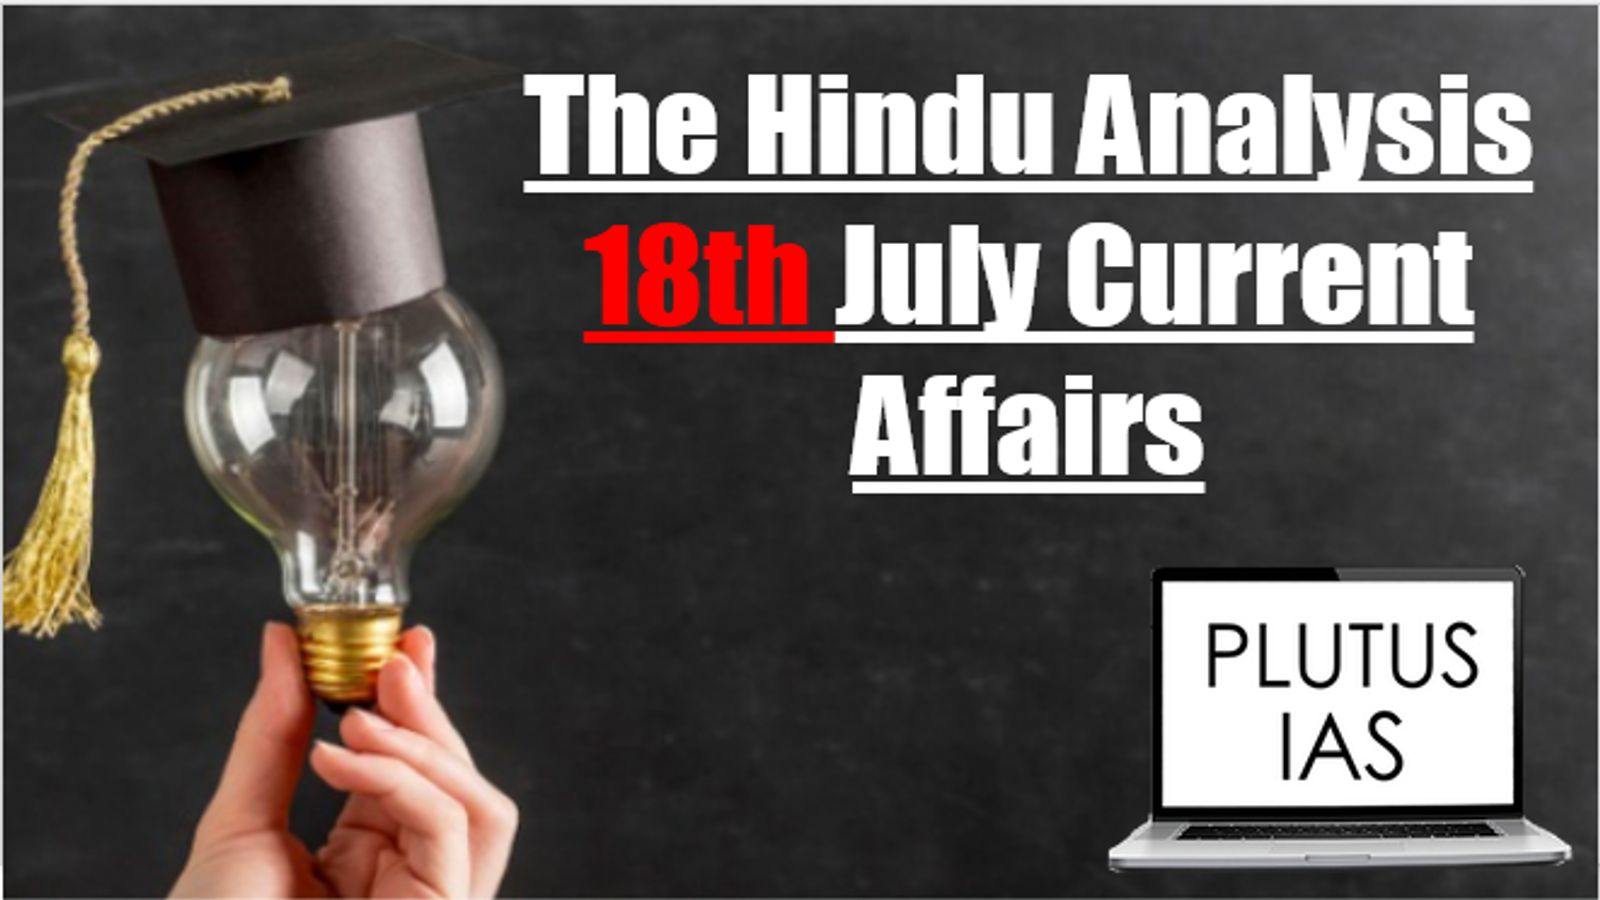 Today Current Affairs 18th July